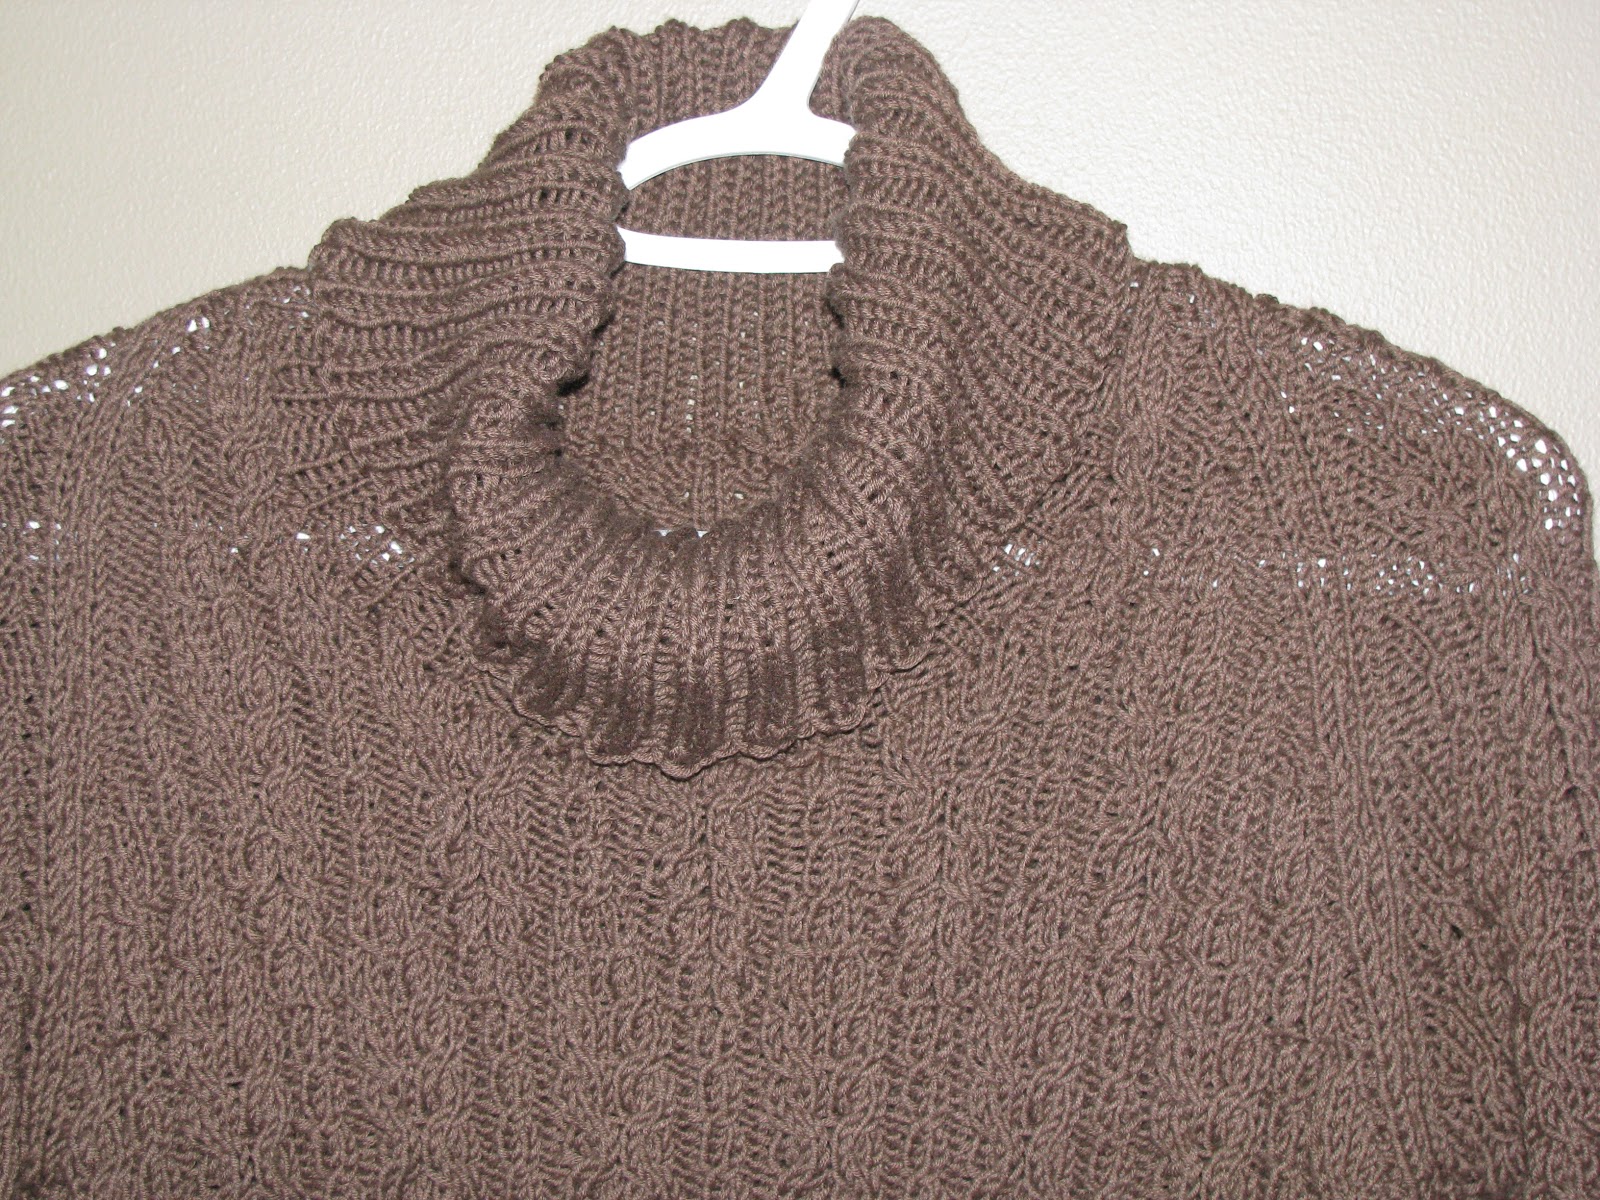 Chris Knits in Niagara: Pulsing Cable Sweater